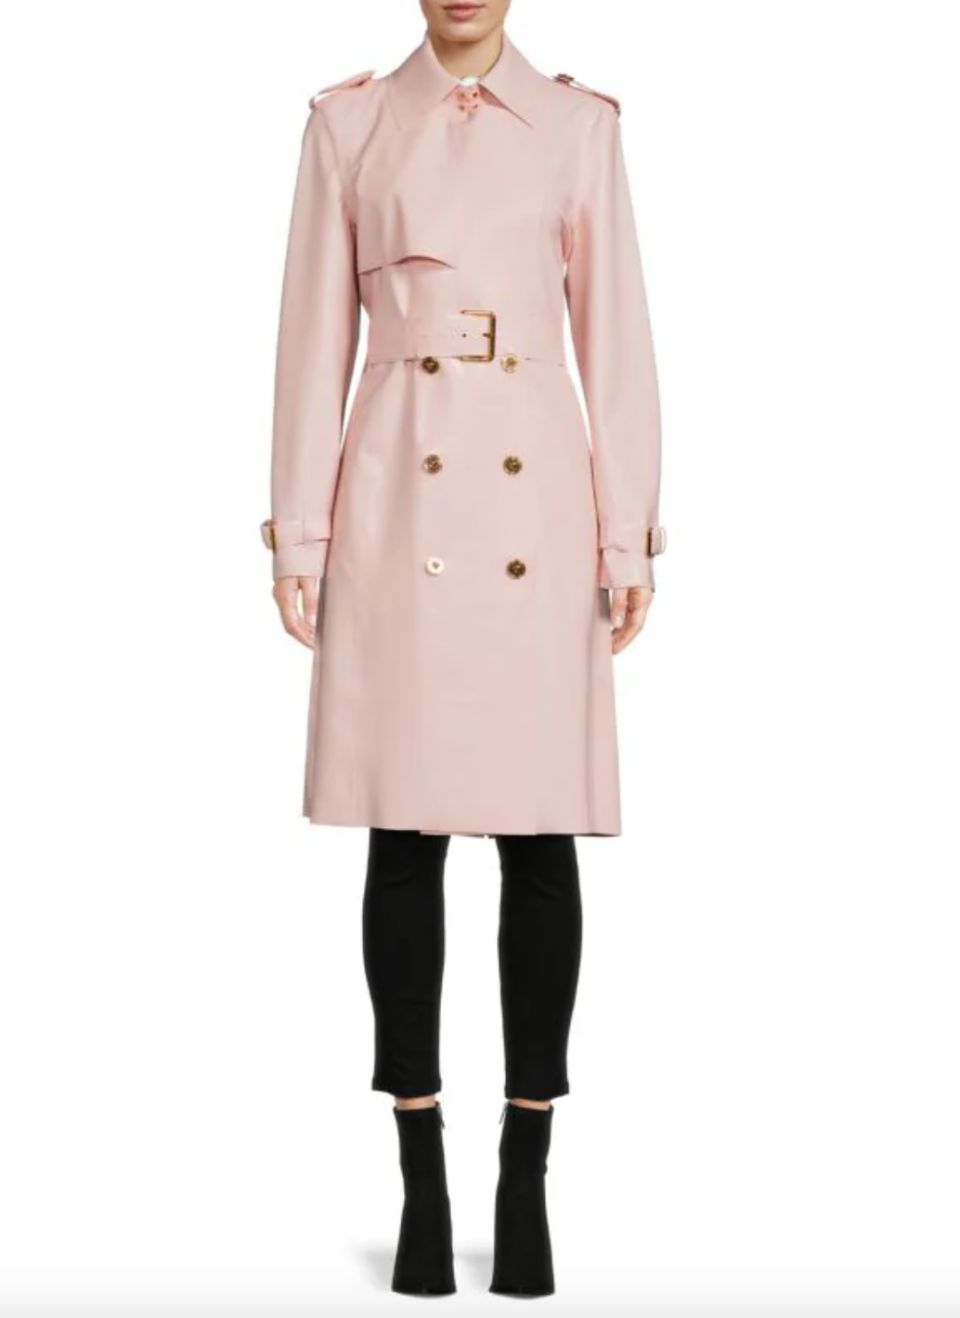 a model wears a pink trench coat